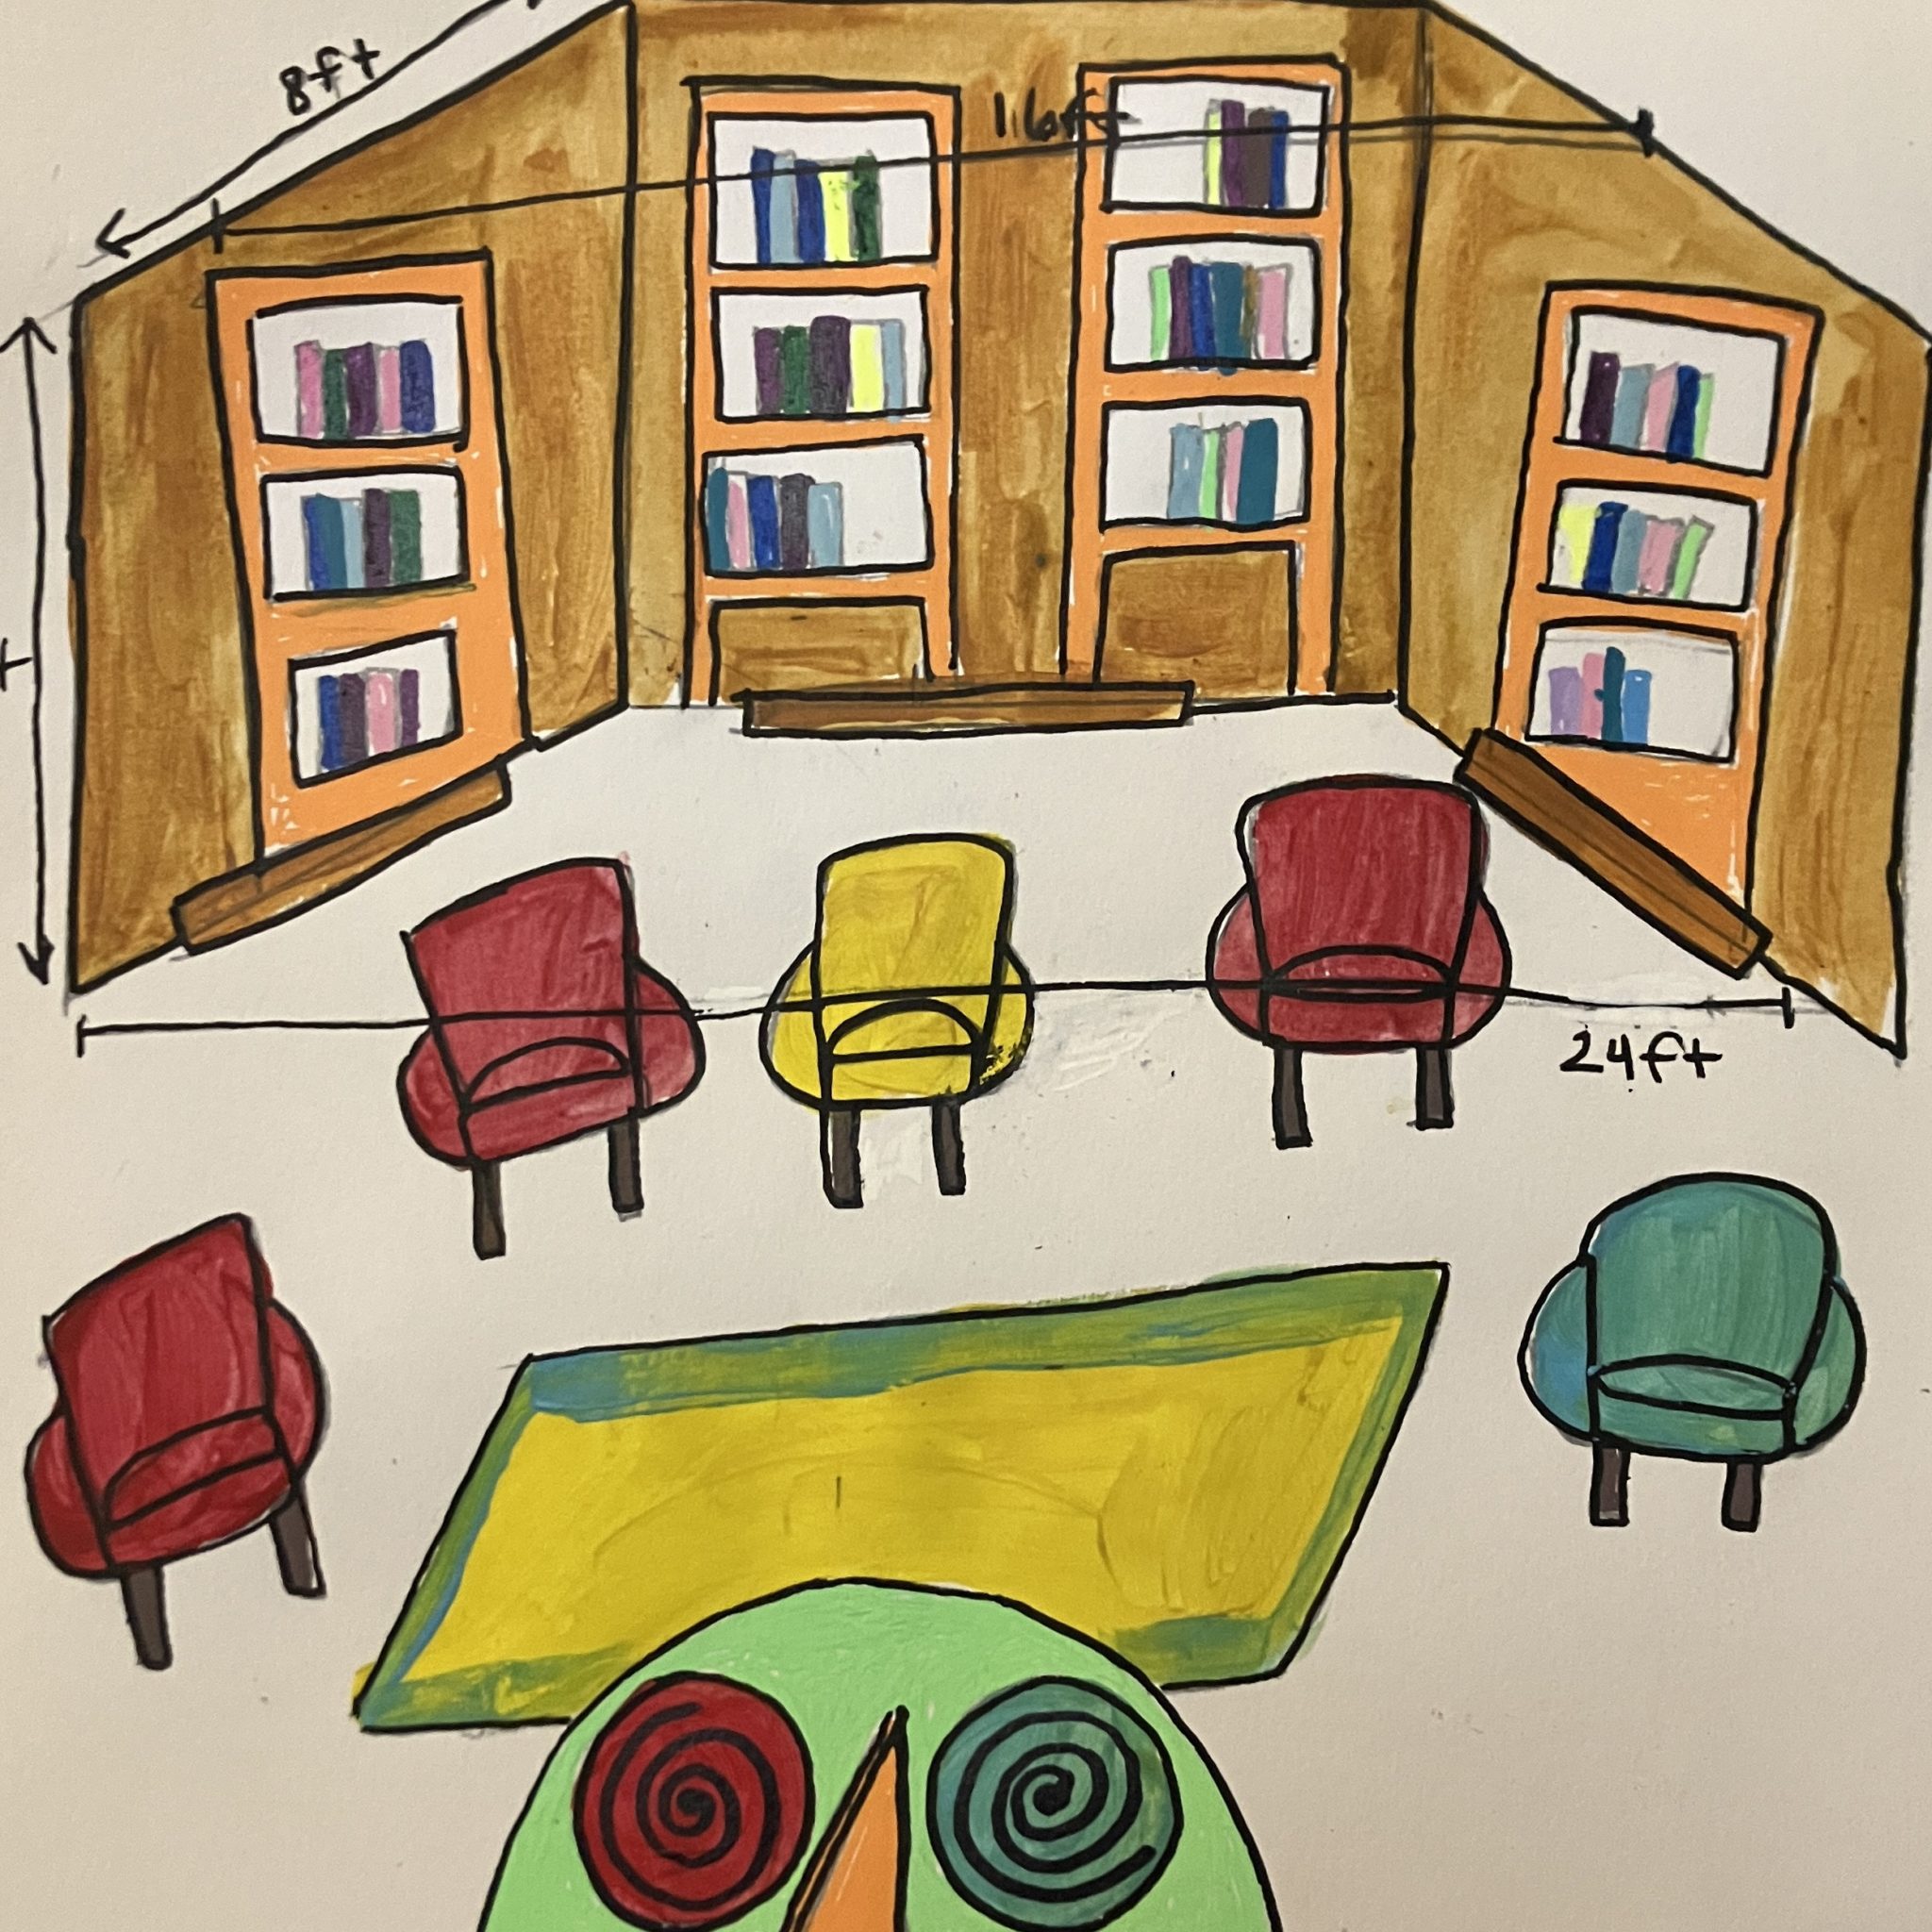 A hand drawn rendering of a library shanty full of books and a cozy area with chairs to sit on